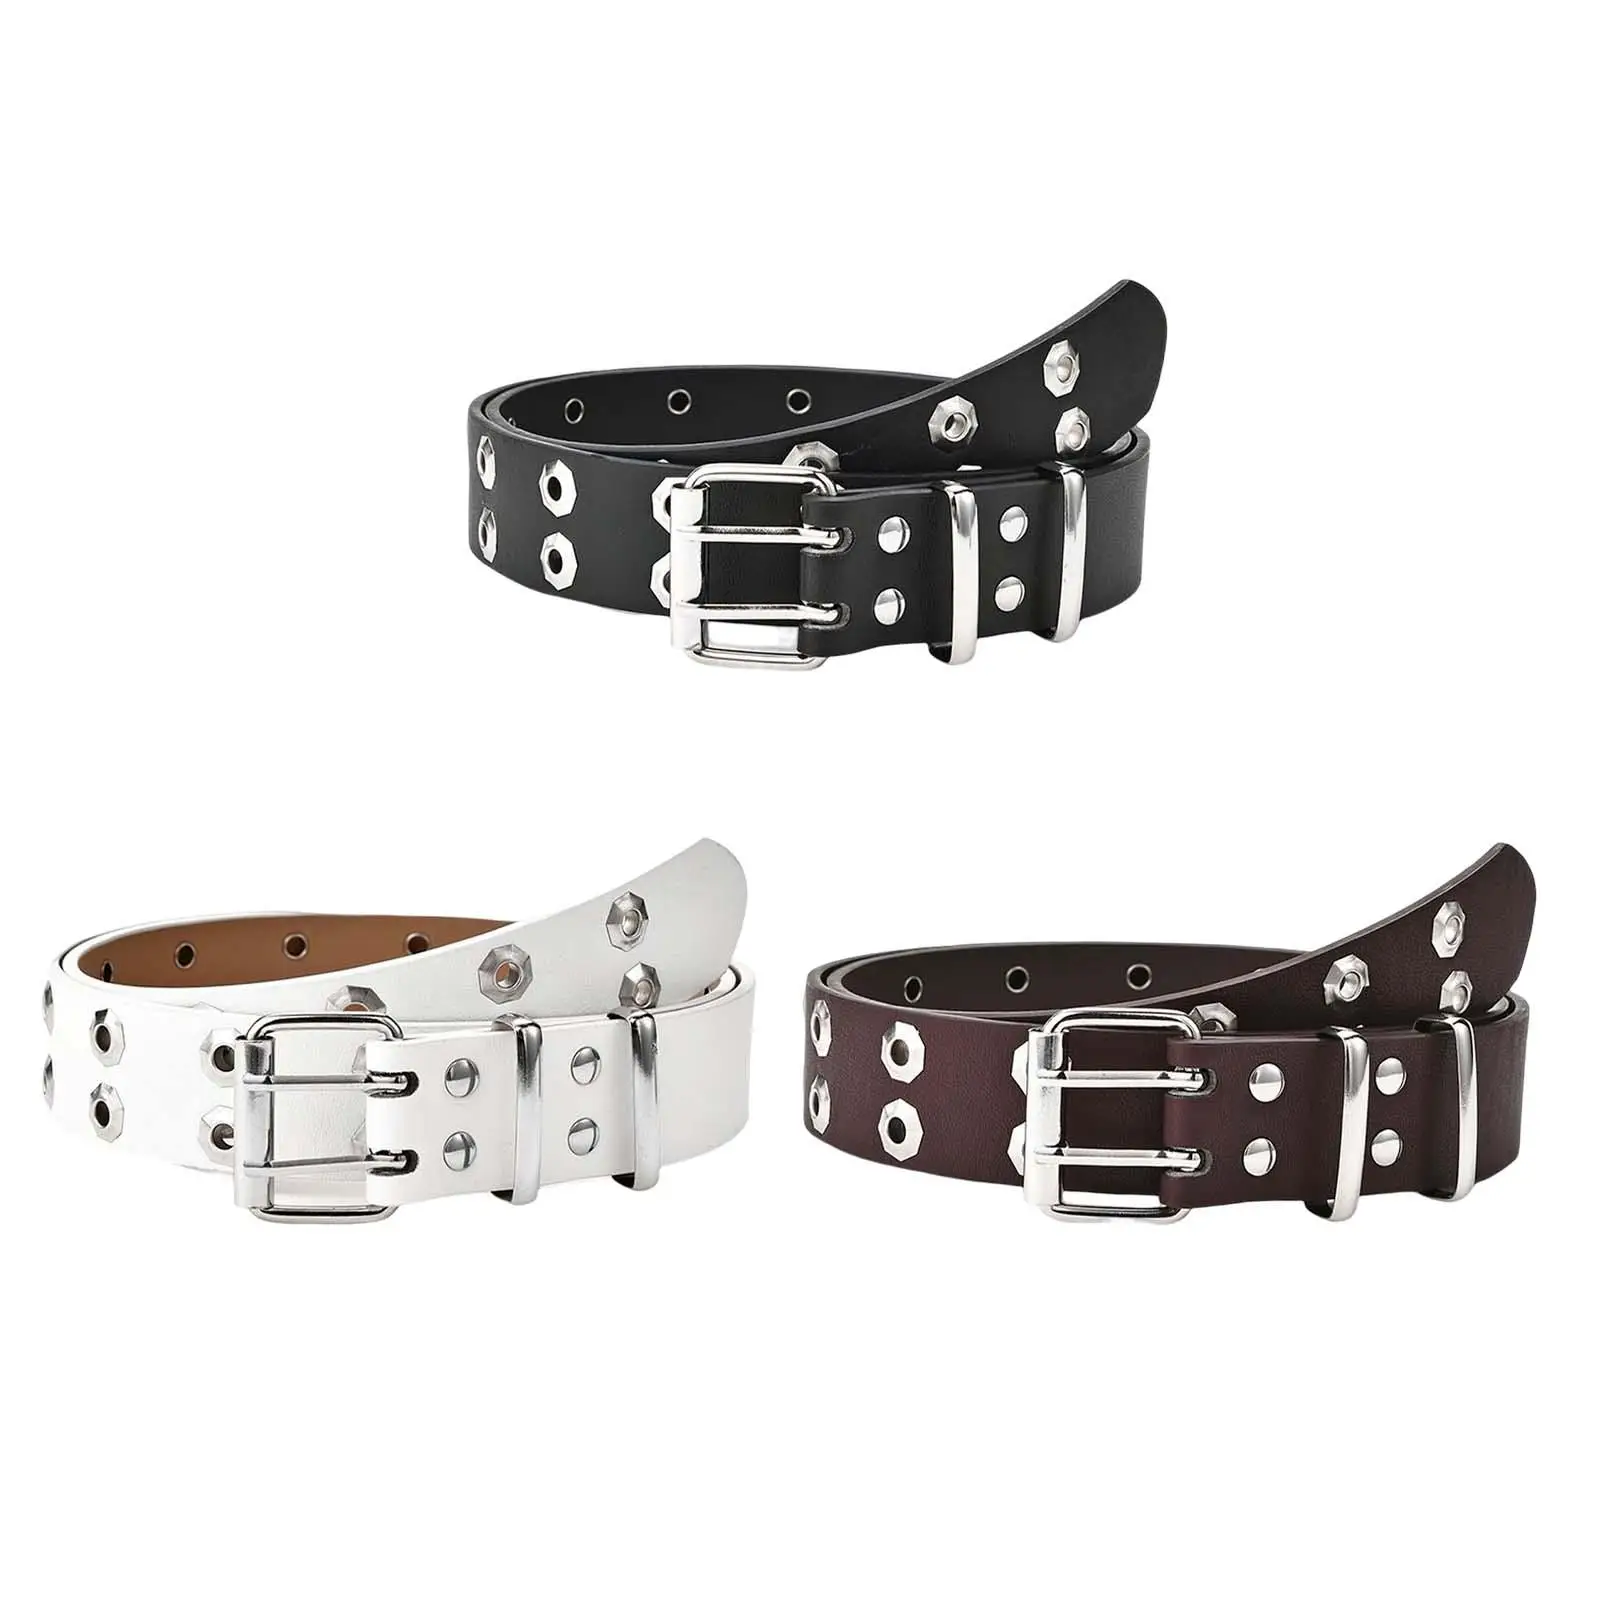 Womens Punk Waist Belt Leather Vintage Style with Metal Buckle Double Grommet Belt for Party Jeans Halloween Pants Dancing